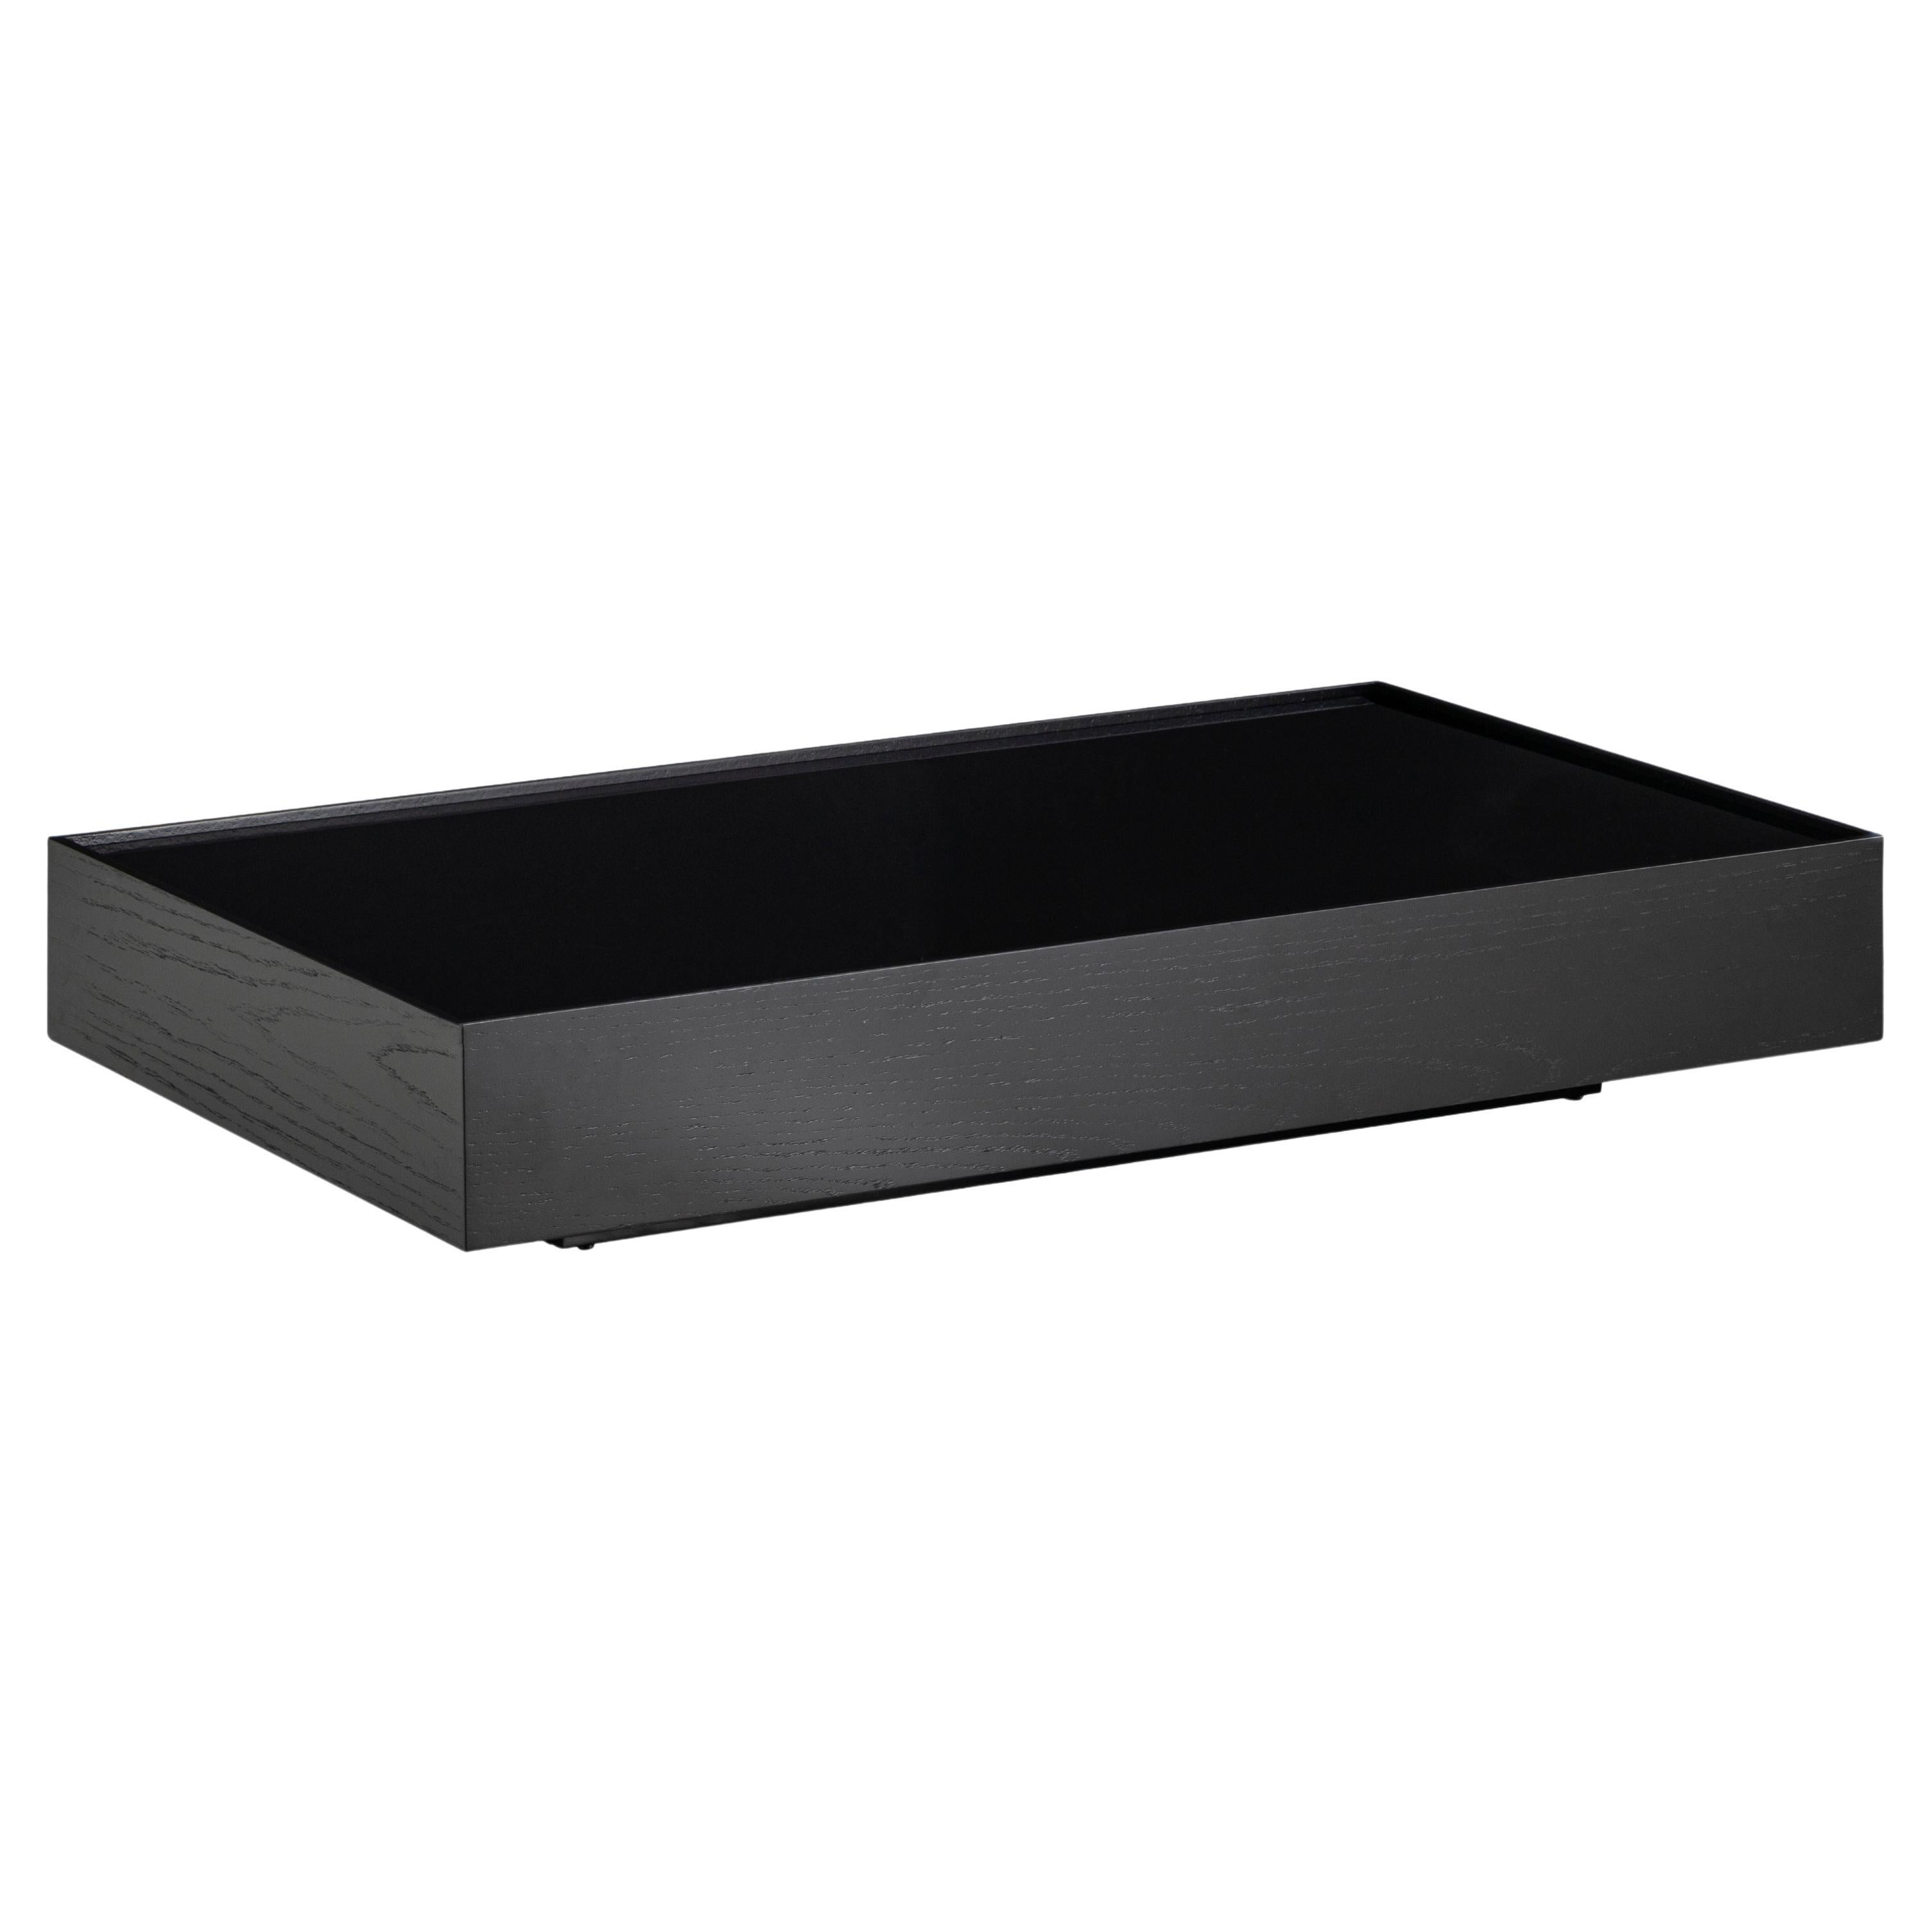 Arc Rectangular Coffee Table in Black Featuring Black Glass Top